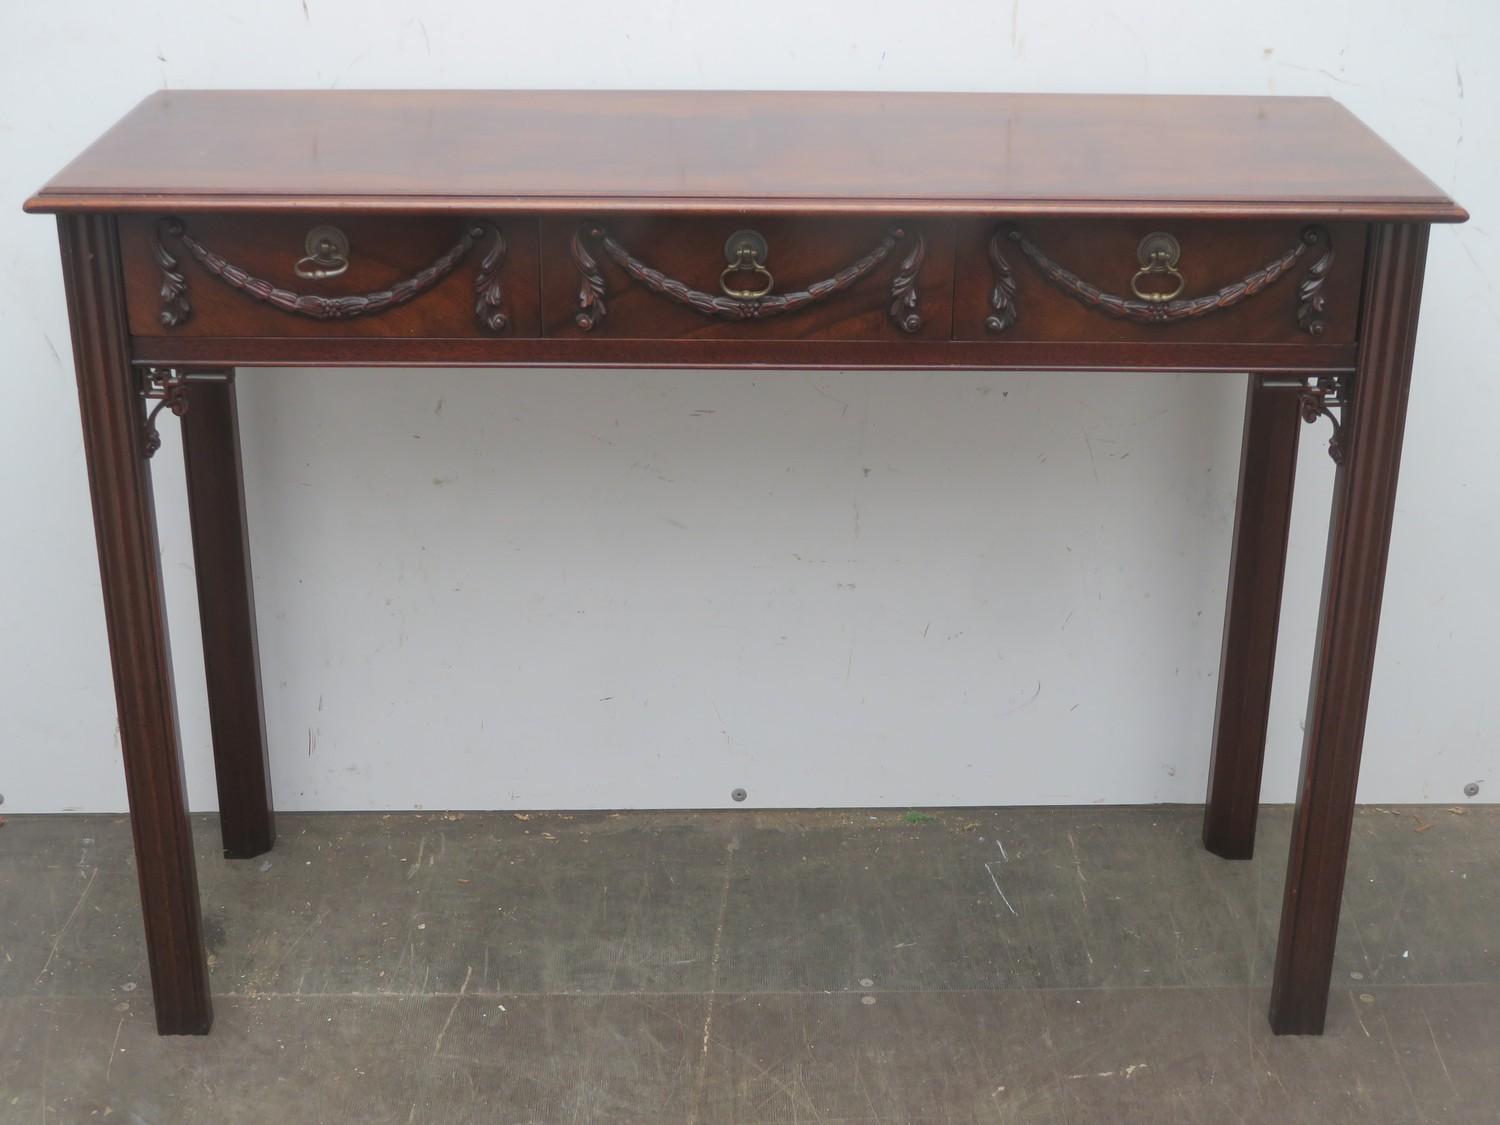 20th century mahogany three drawer console table with carved decoration to front, Approx. 75.5cms